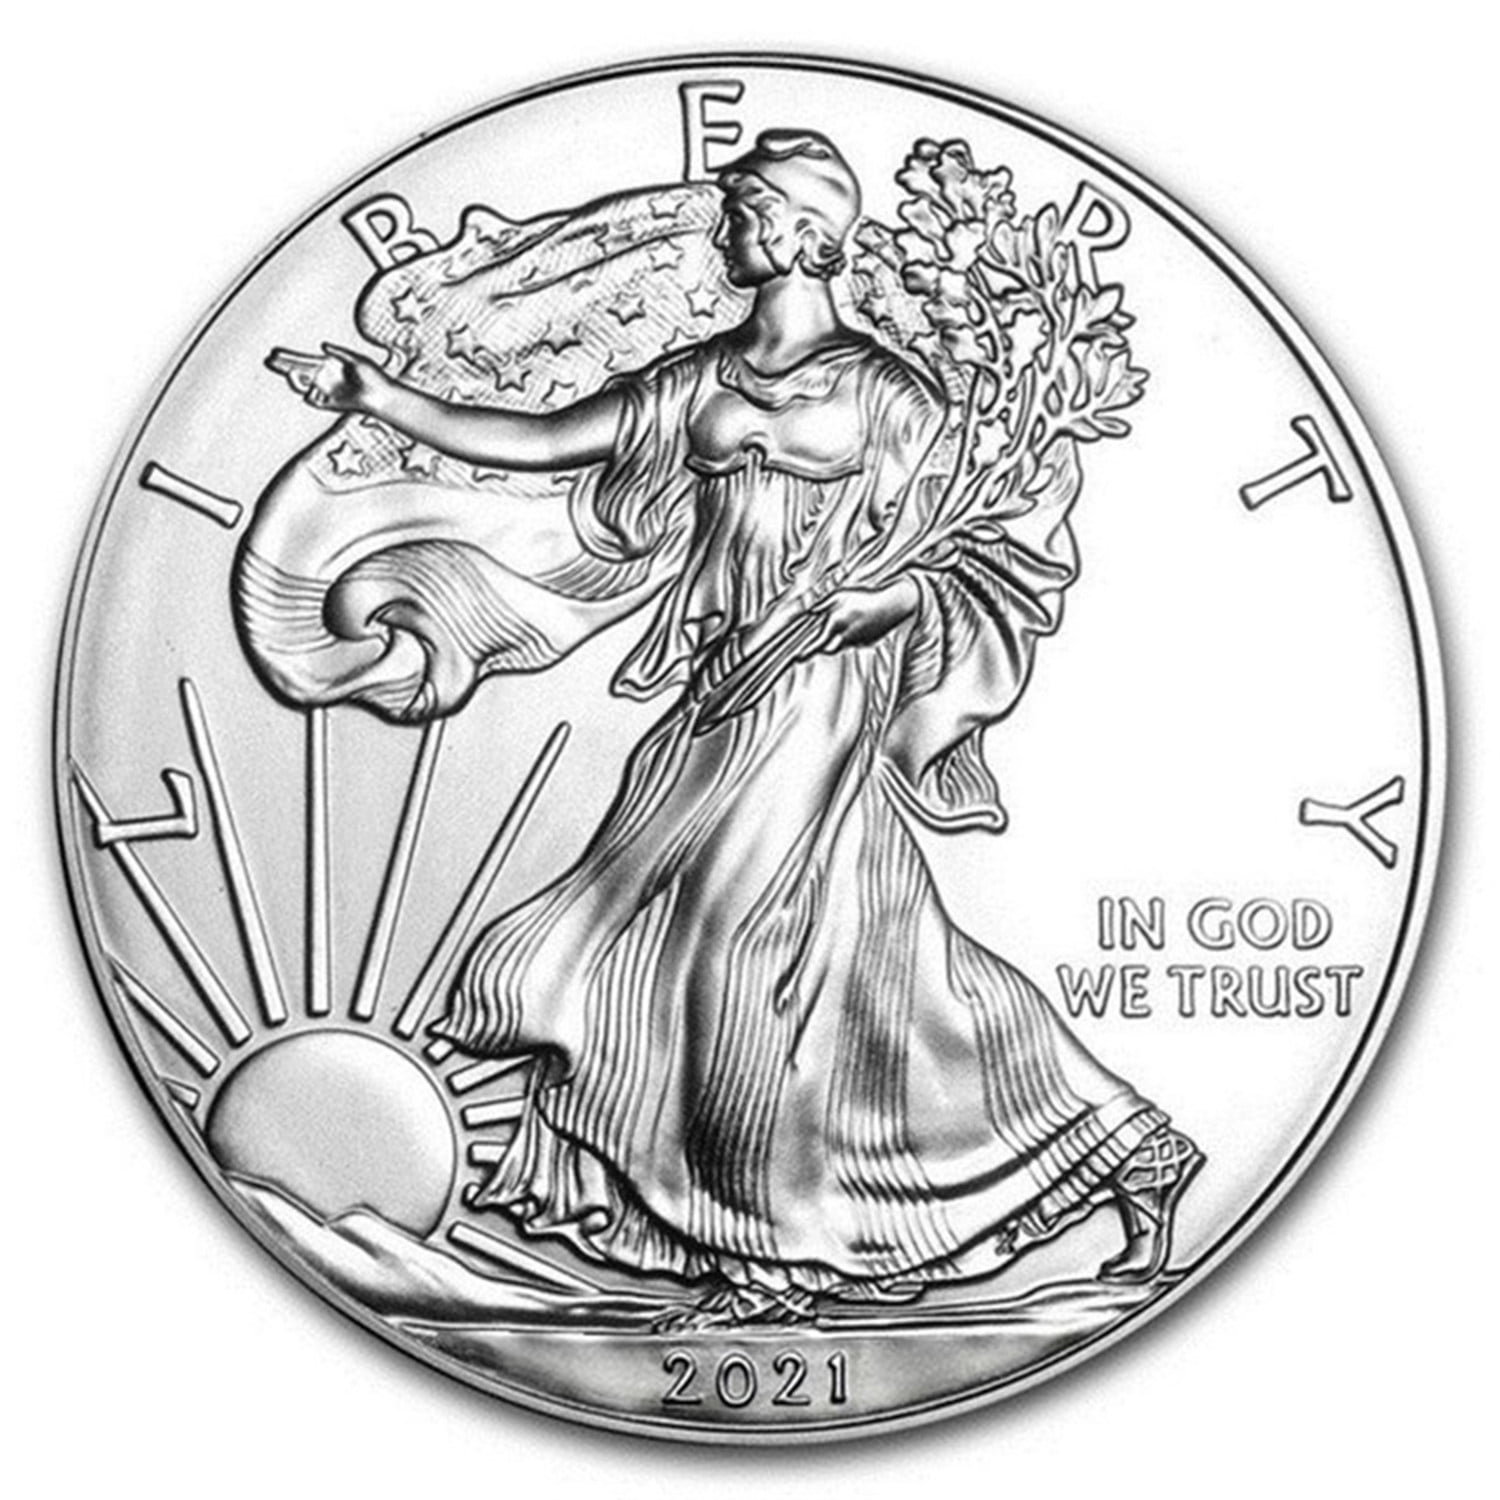 Xmas Hot Lady Liberty In God We Trust Commemorative One Dollar Collect Coin Gift 